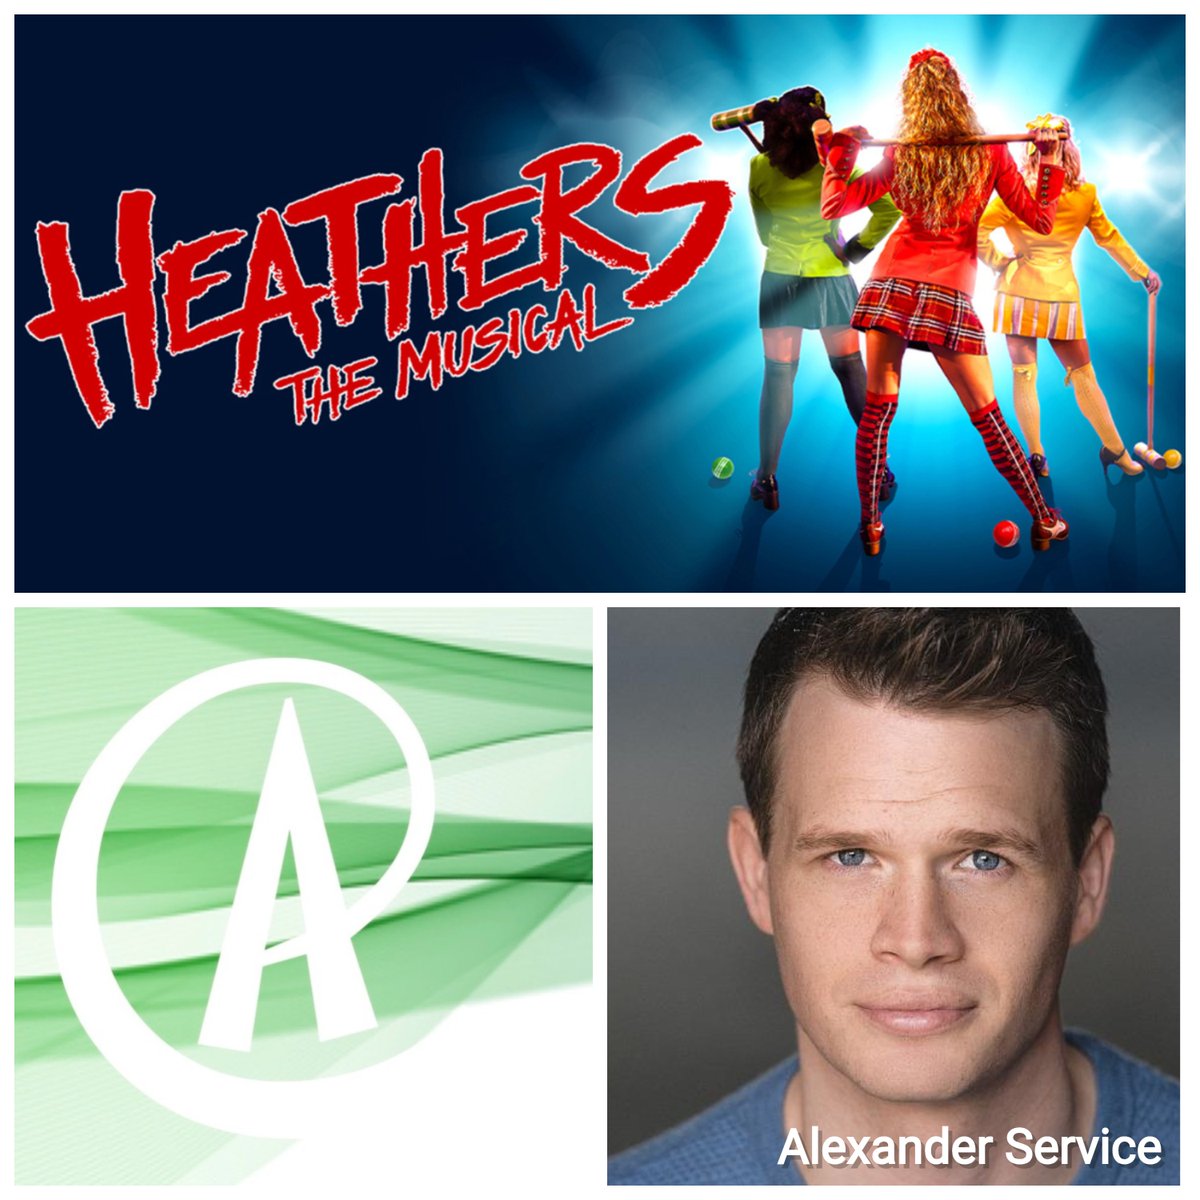 Best wishes to @TheAlexService for the opening performance of @HeathersMusical @sohoplacelondon this evening. Casting by: @BKL_Productions heathersthemusical.com